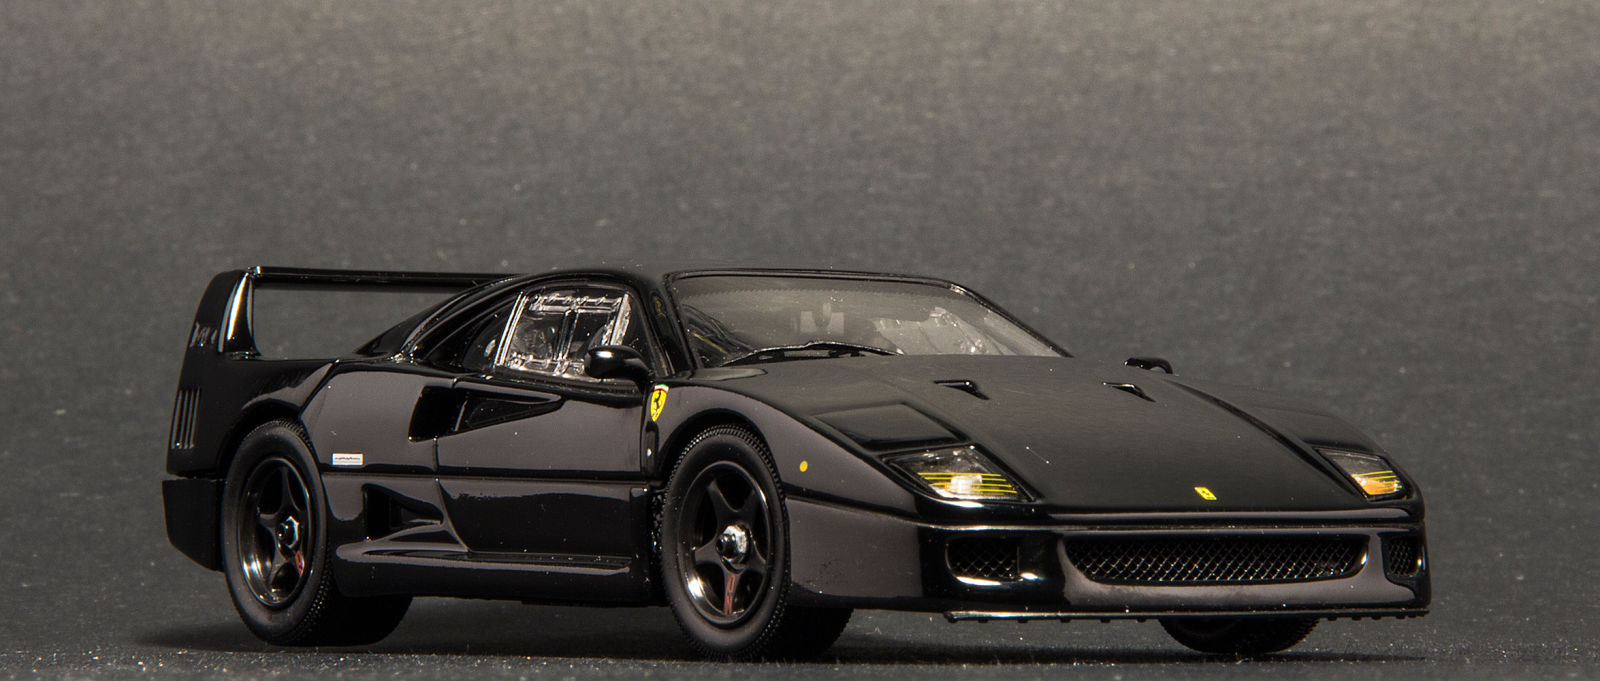 Illustration for article titled Review: Kyosho 1:43 Ferrari F40